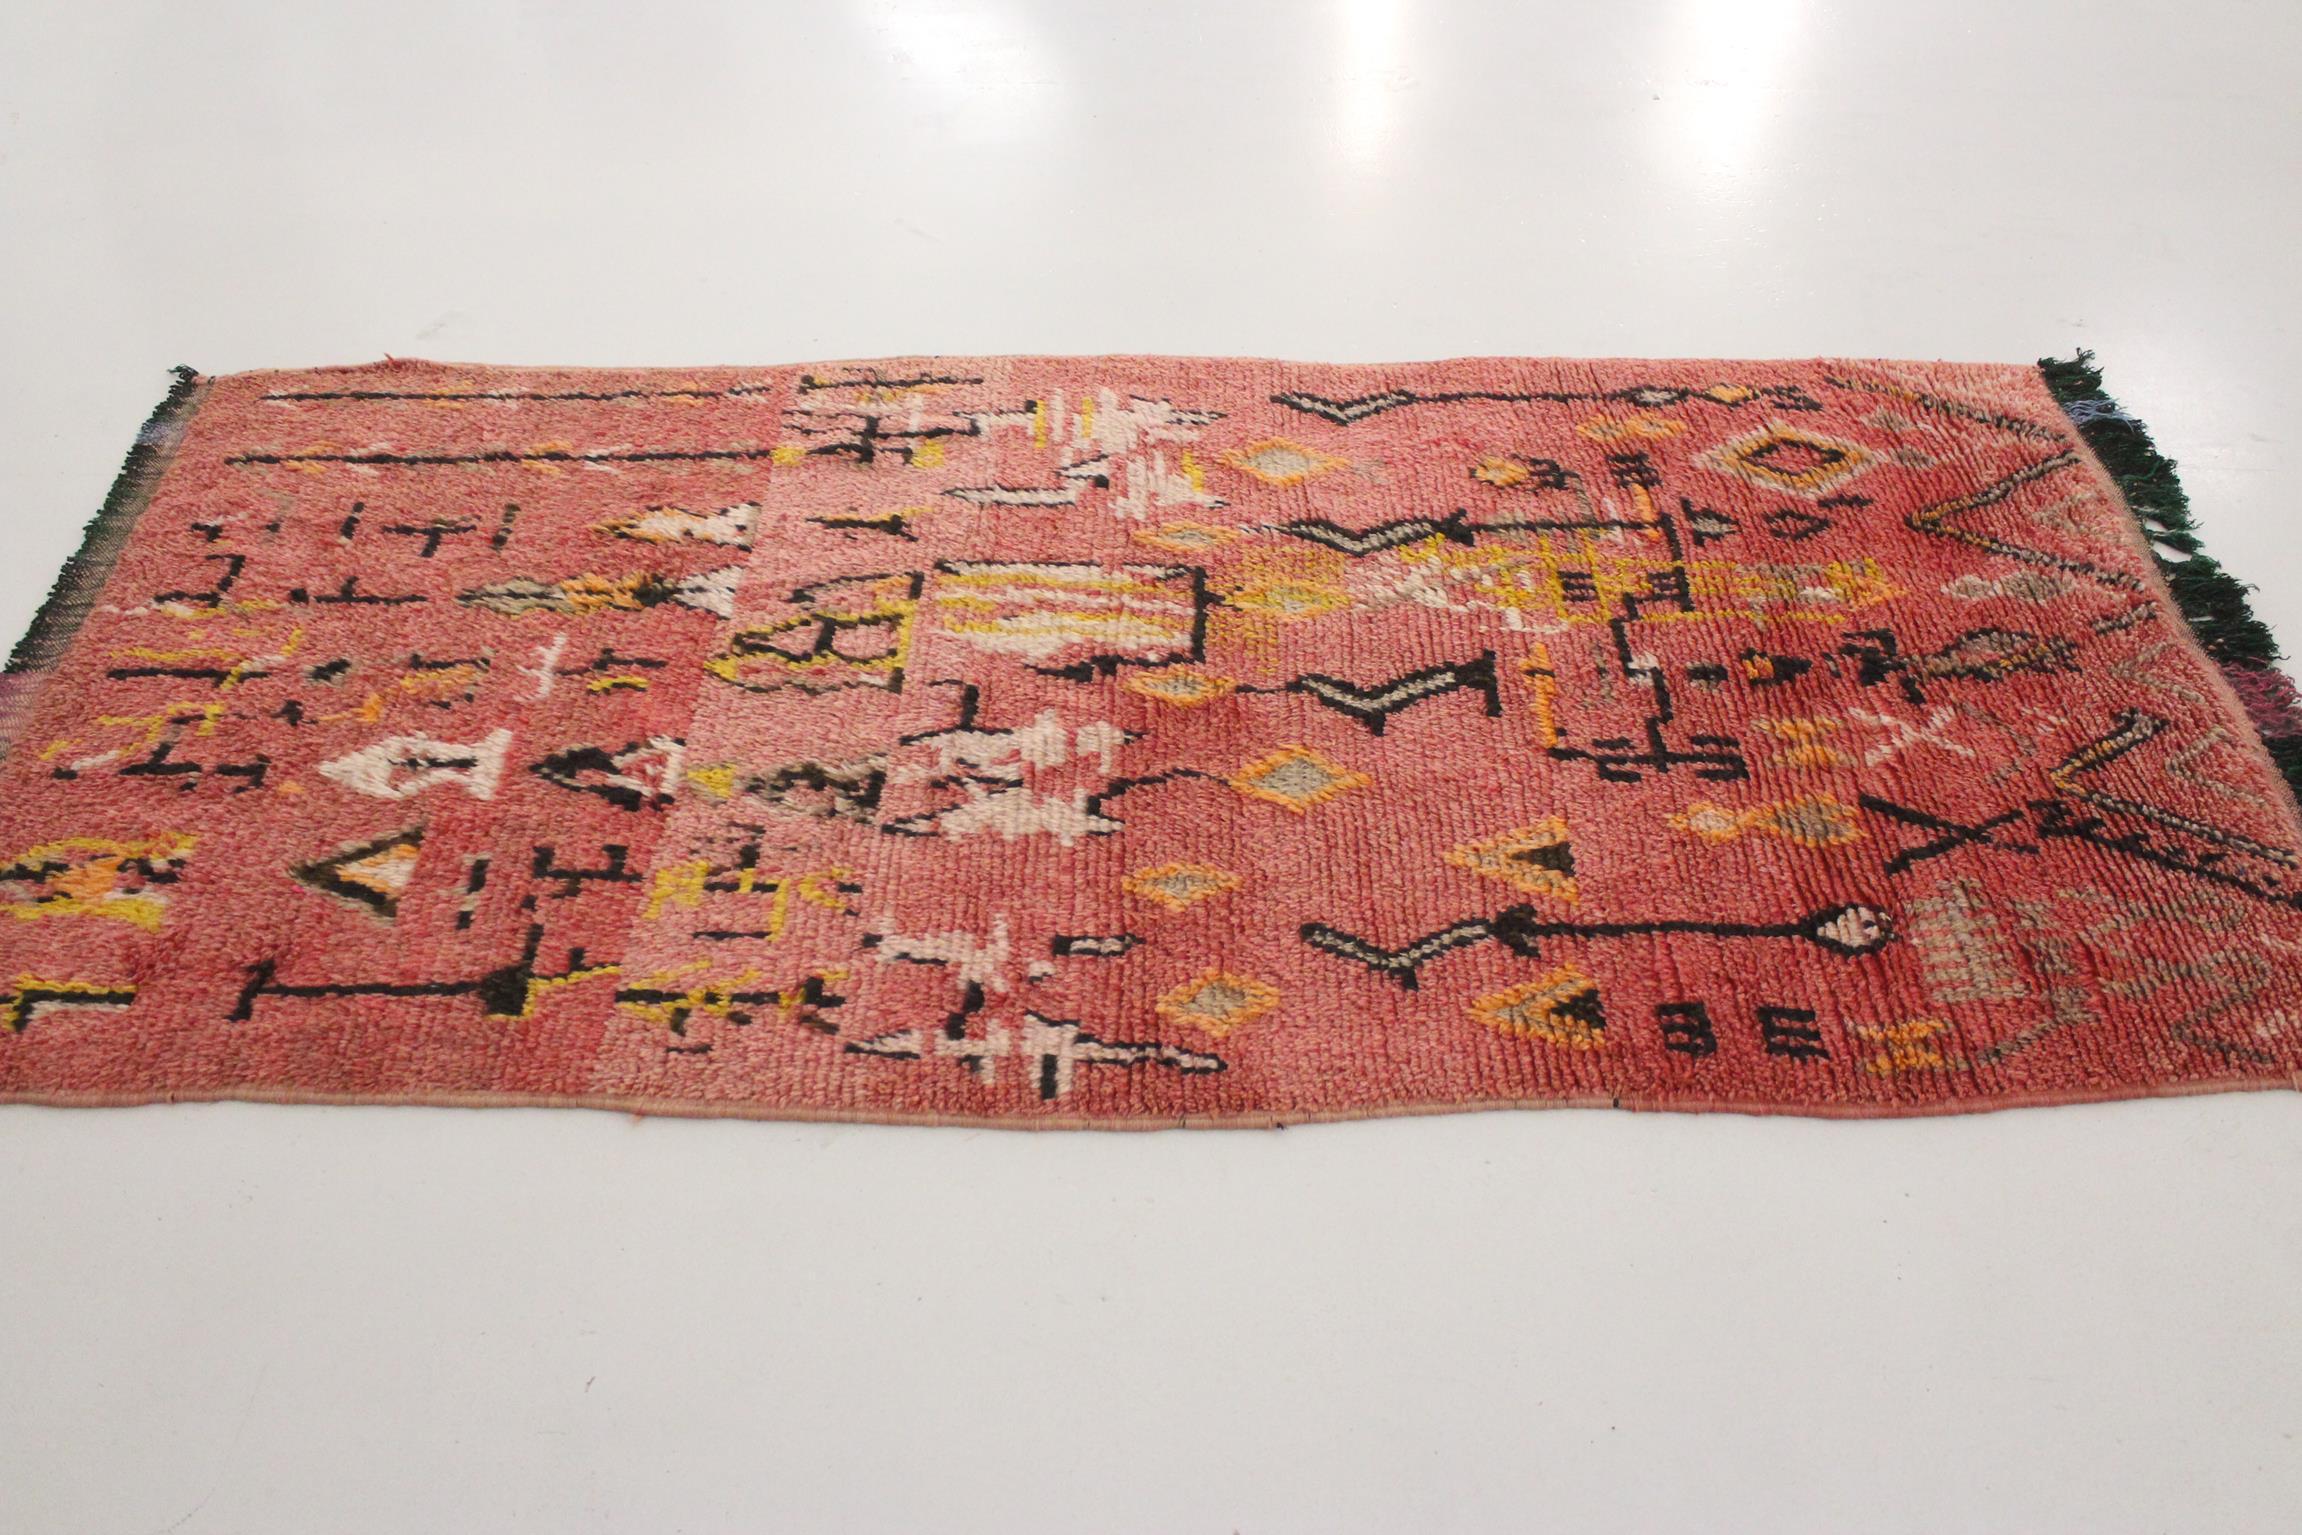 Hand-Woven Vintage Moroccan Azilal rug - Pink and yellow - 3.7x7.7feet / 114x236cm For Sale